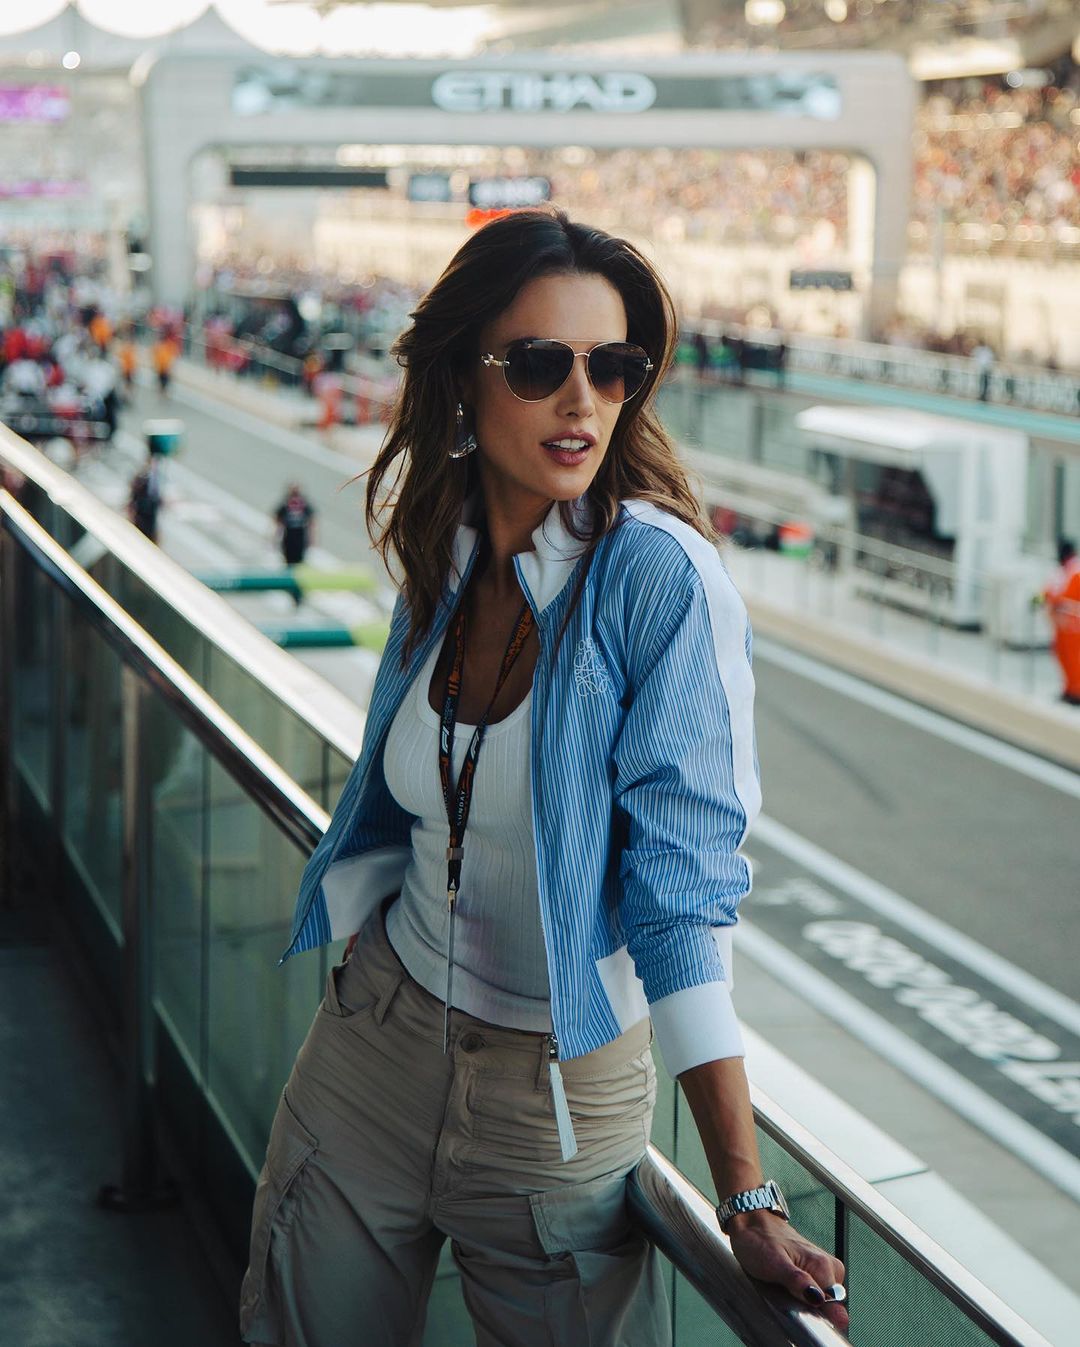 Alessandra Ambrosio is In The Fast Lane! - Photo 2